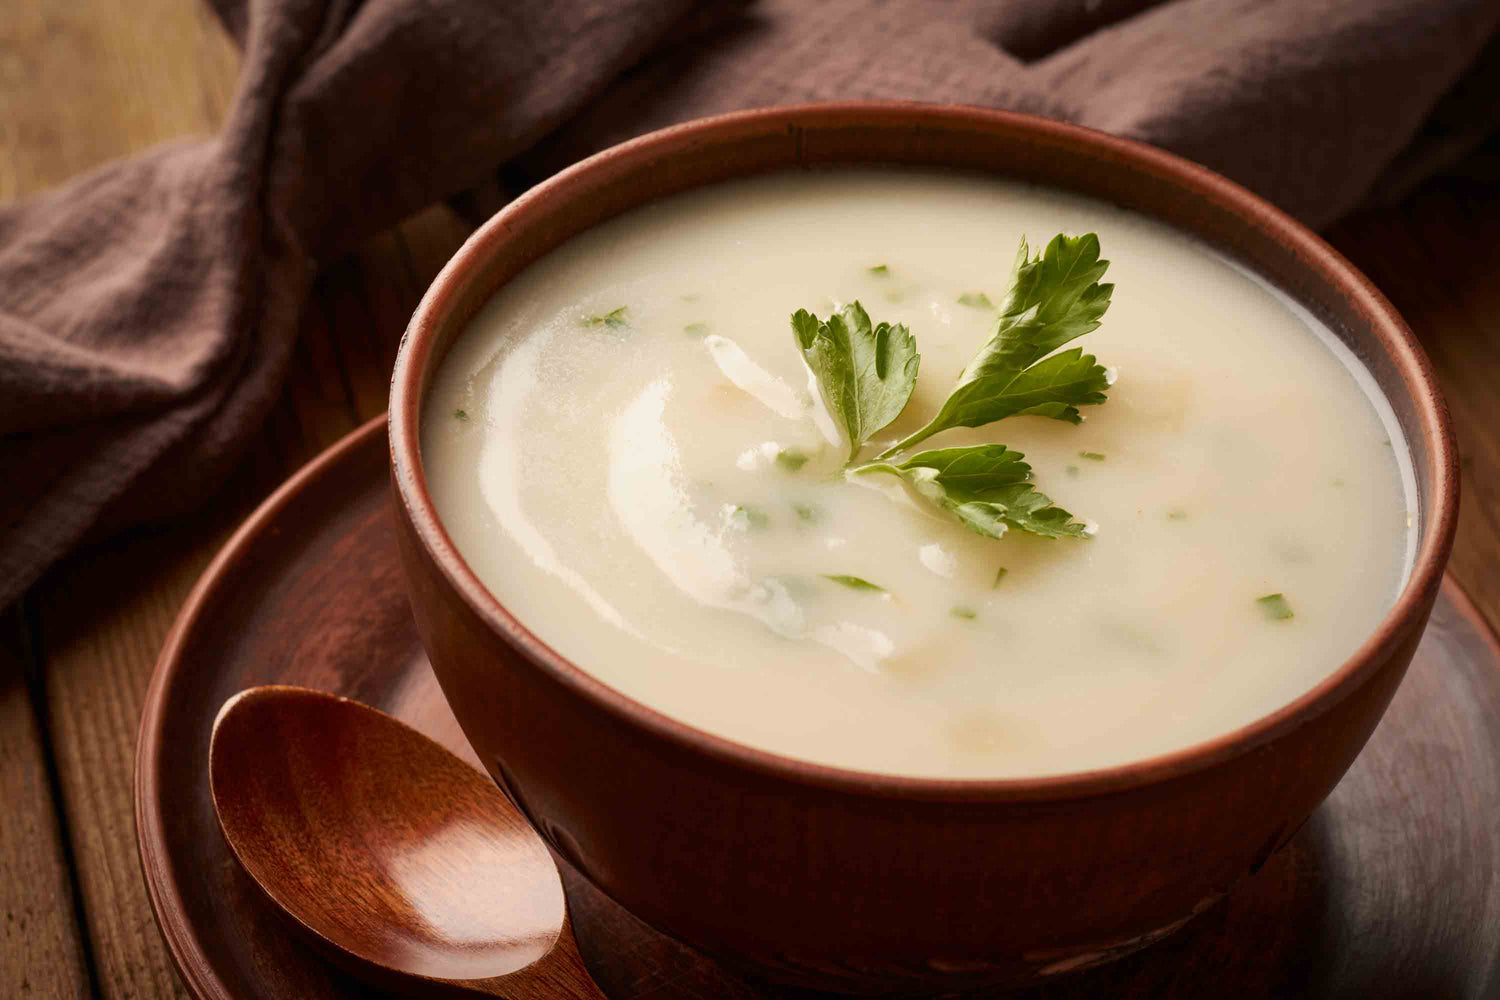 Nourish Your Body and Delight Your Taste Buds with this Whole Food Recipe: Two Potato Soup